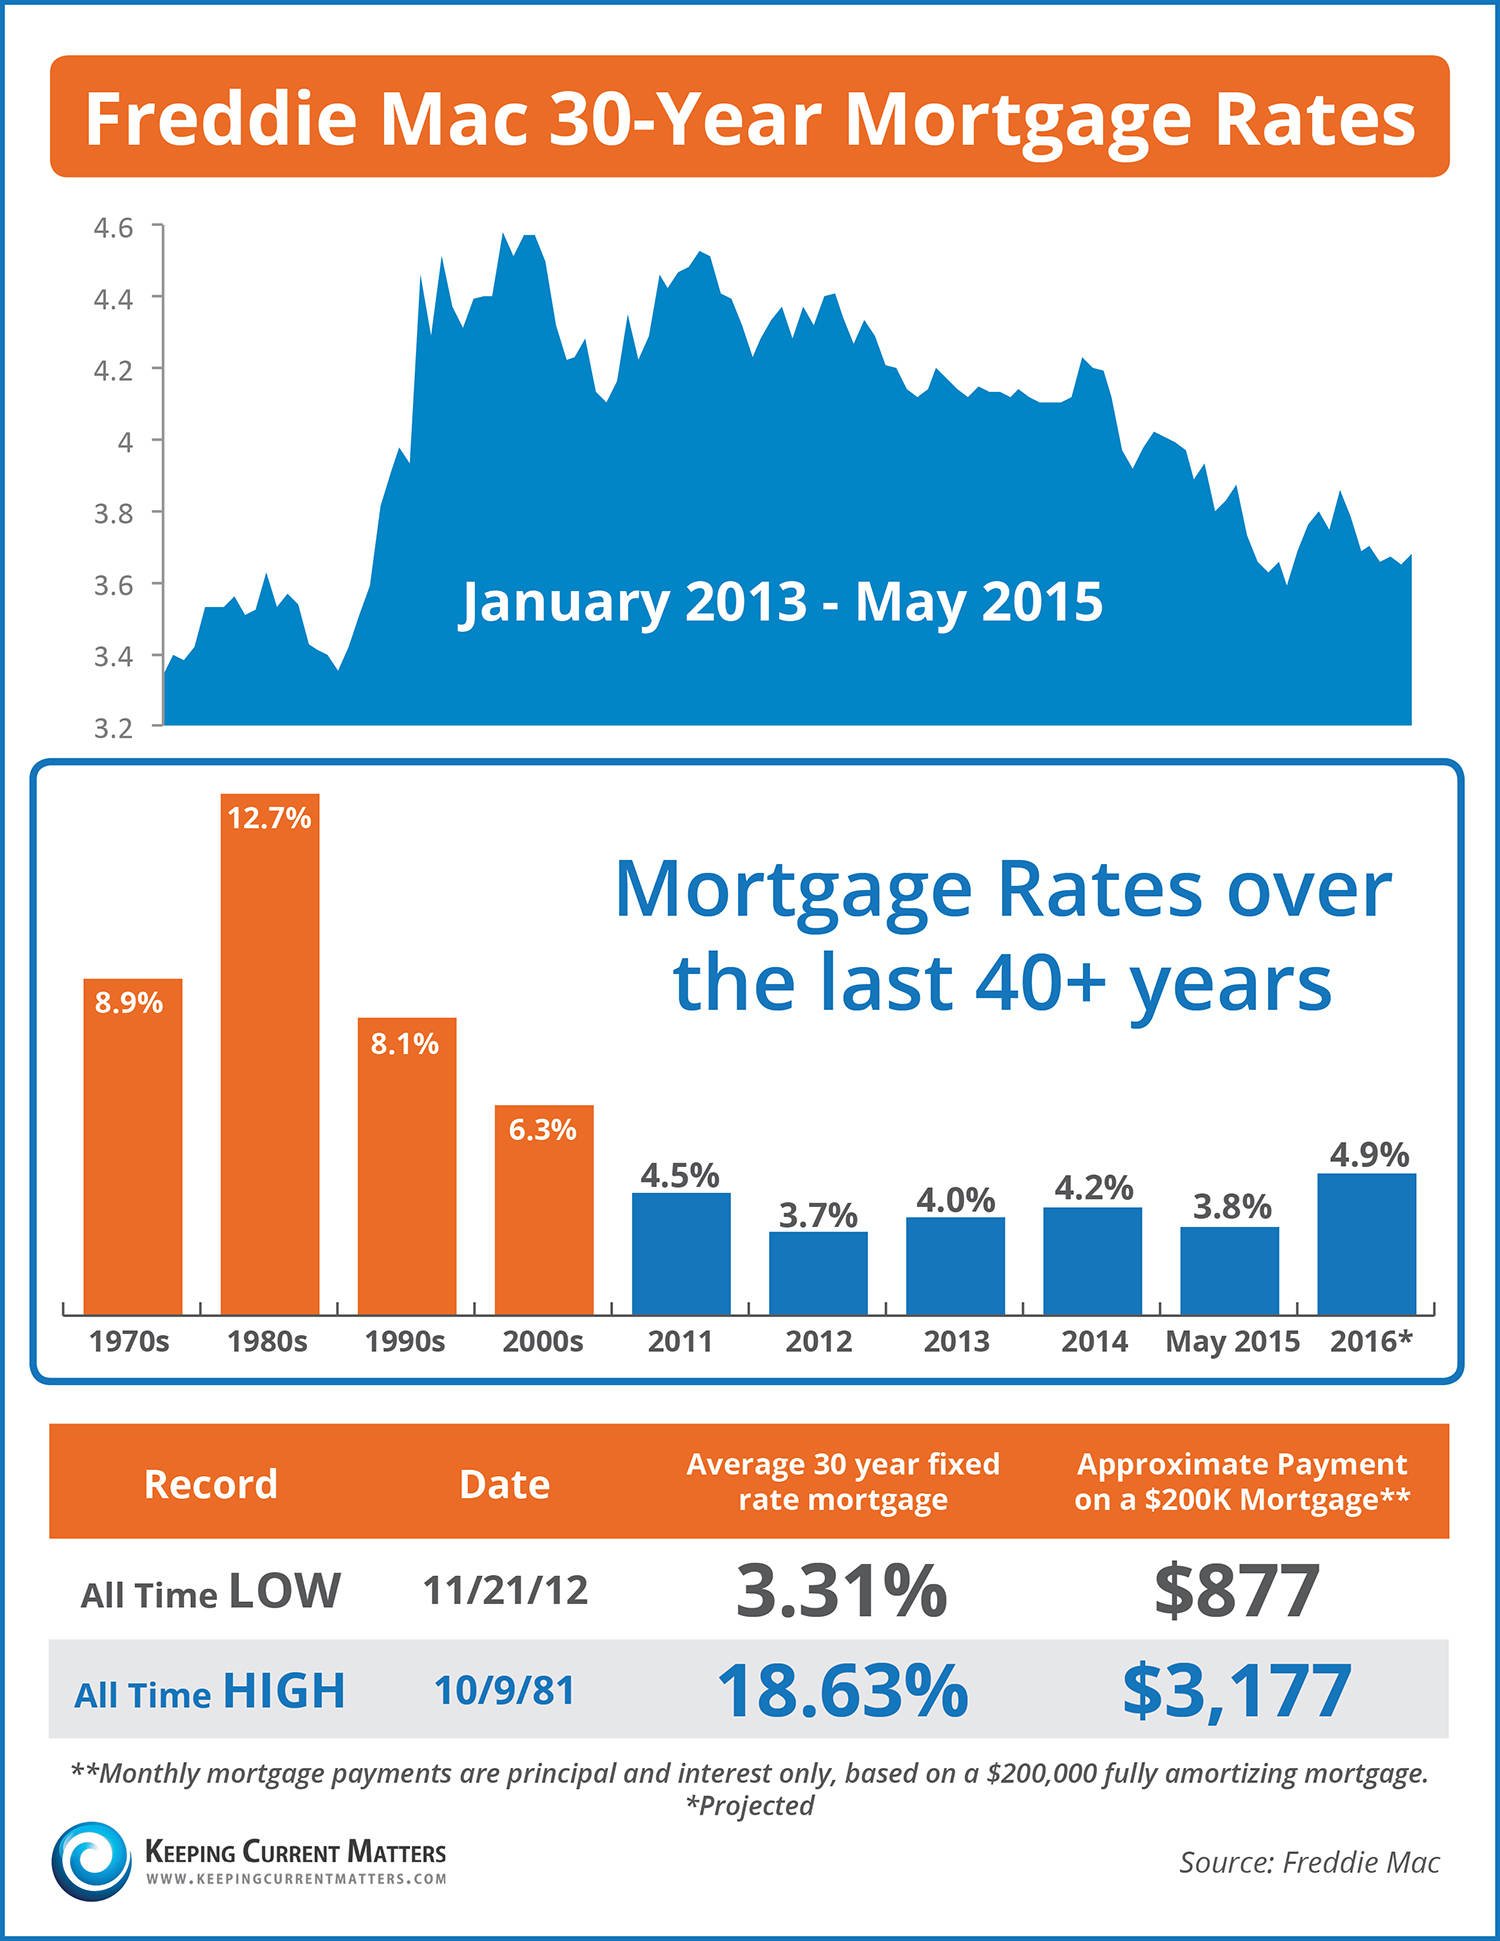 How Do Mortgage Rates Impact Home Buying Affordability?